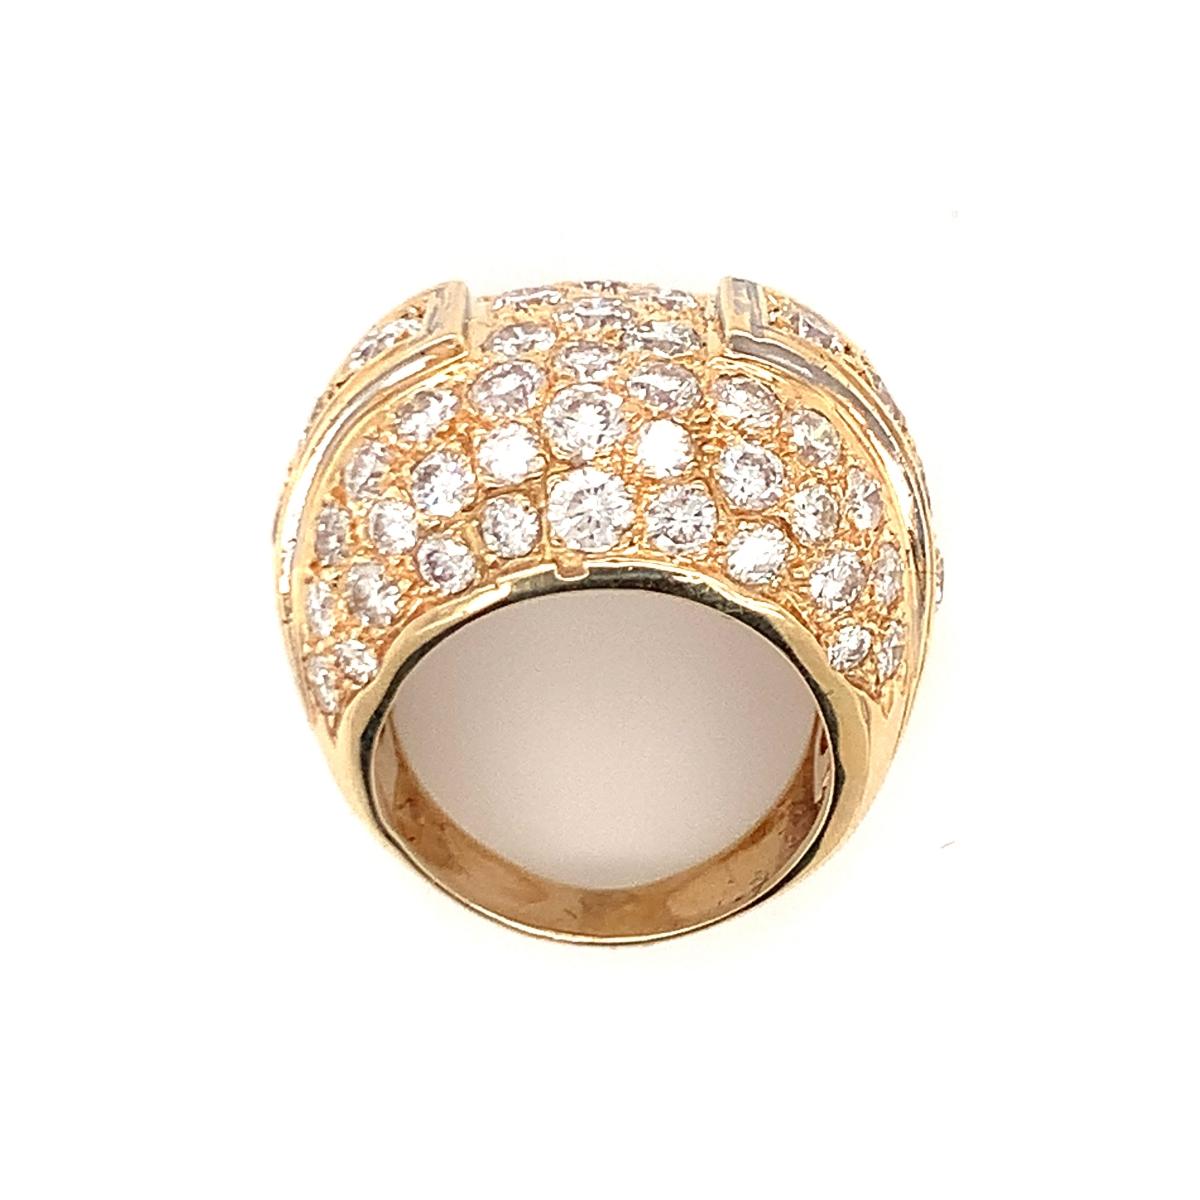 Pave Diamond Bombe 14K Yellow Gold Ring, circa 1970s For Sale 2